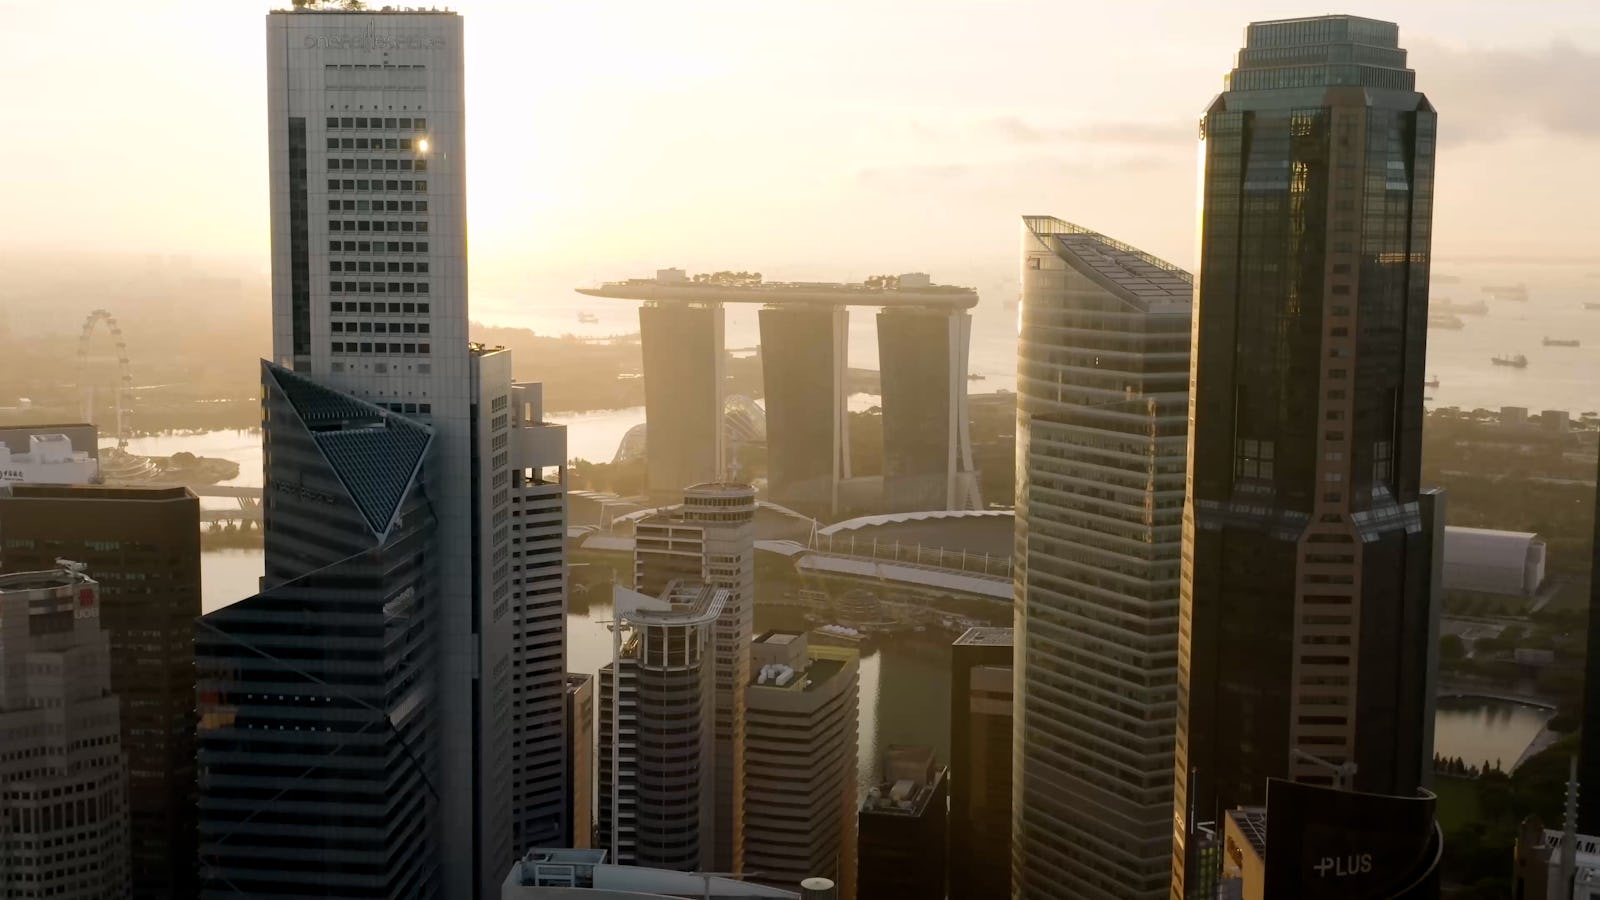 Safdie Architects to add fourth tower to Marina Bay Sands resort